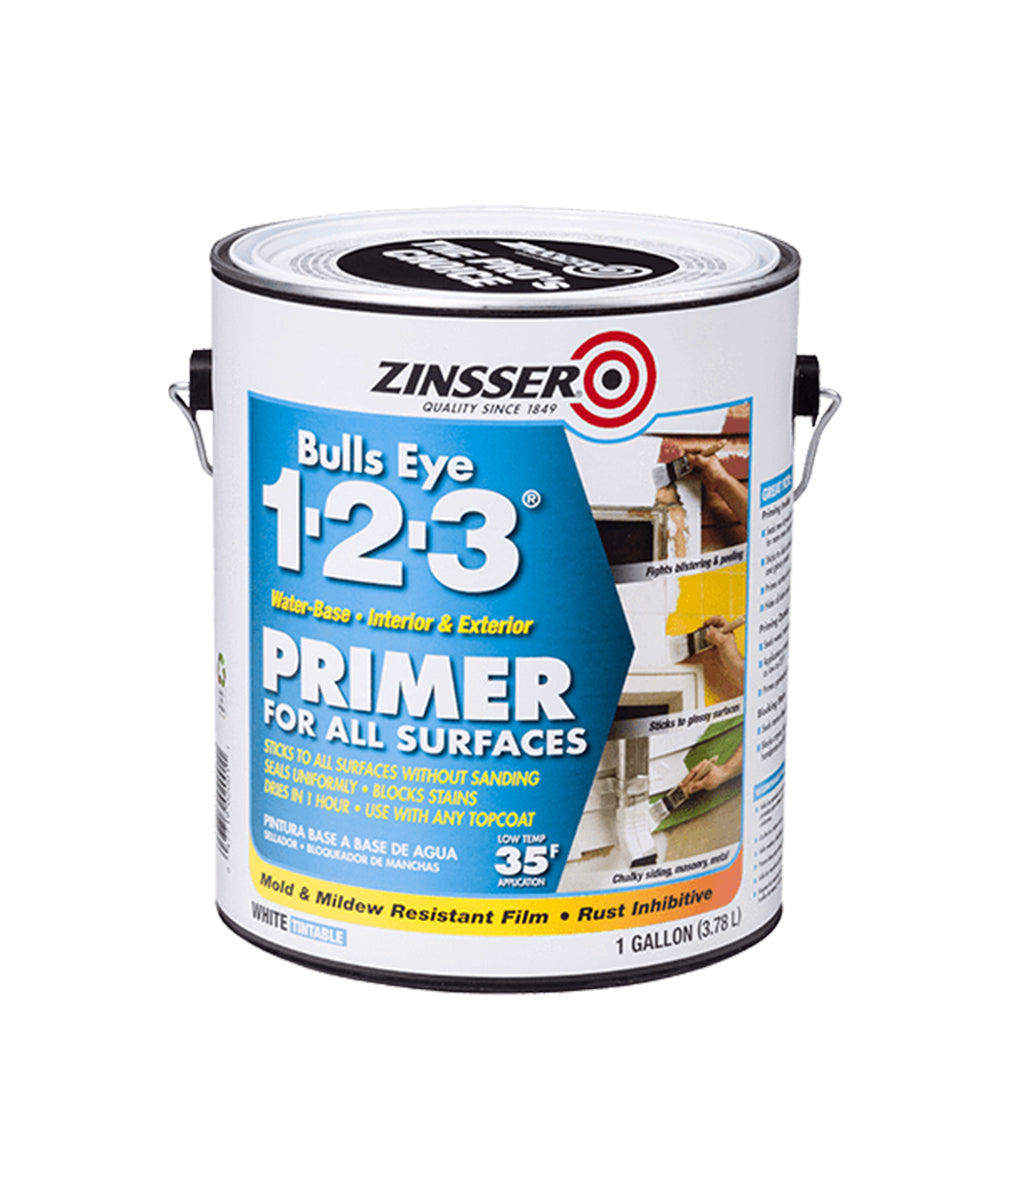 Zinsser Bullseye 123 Watertbase sealer gallon, available at Aboff's in New York and Long Island.